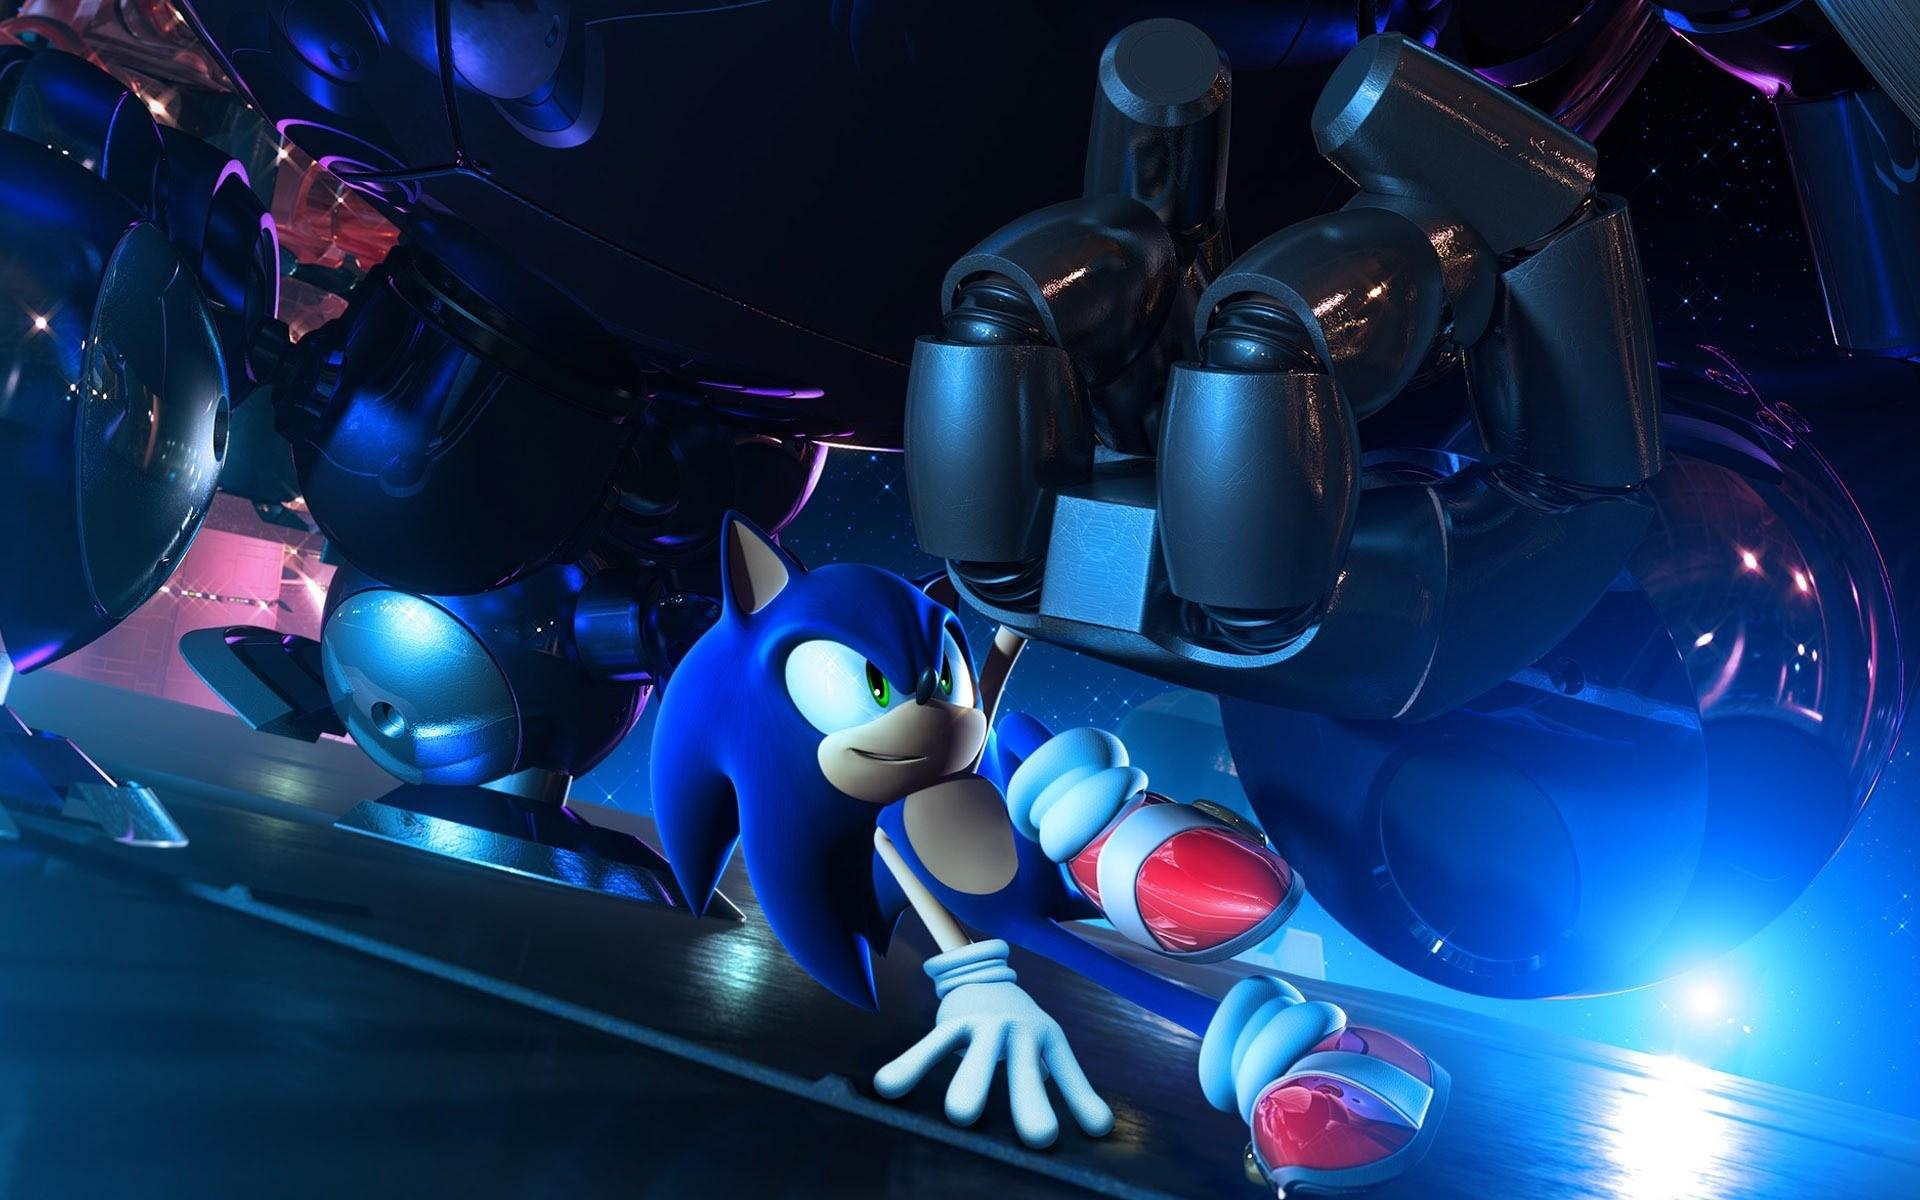 Sonic The Hedgehog 2019 Movie Update: Sonic's New Design & Main Role